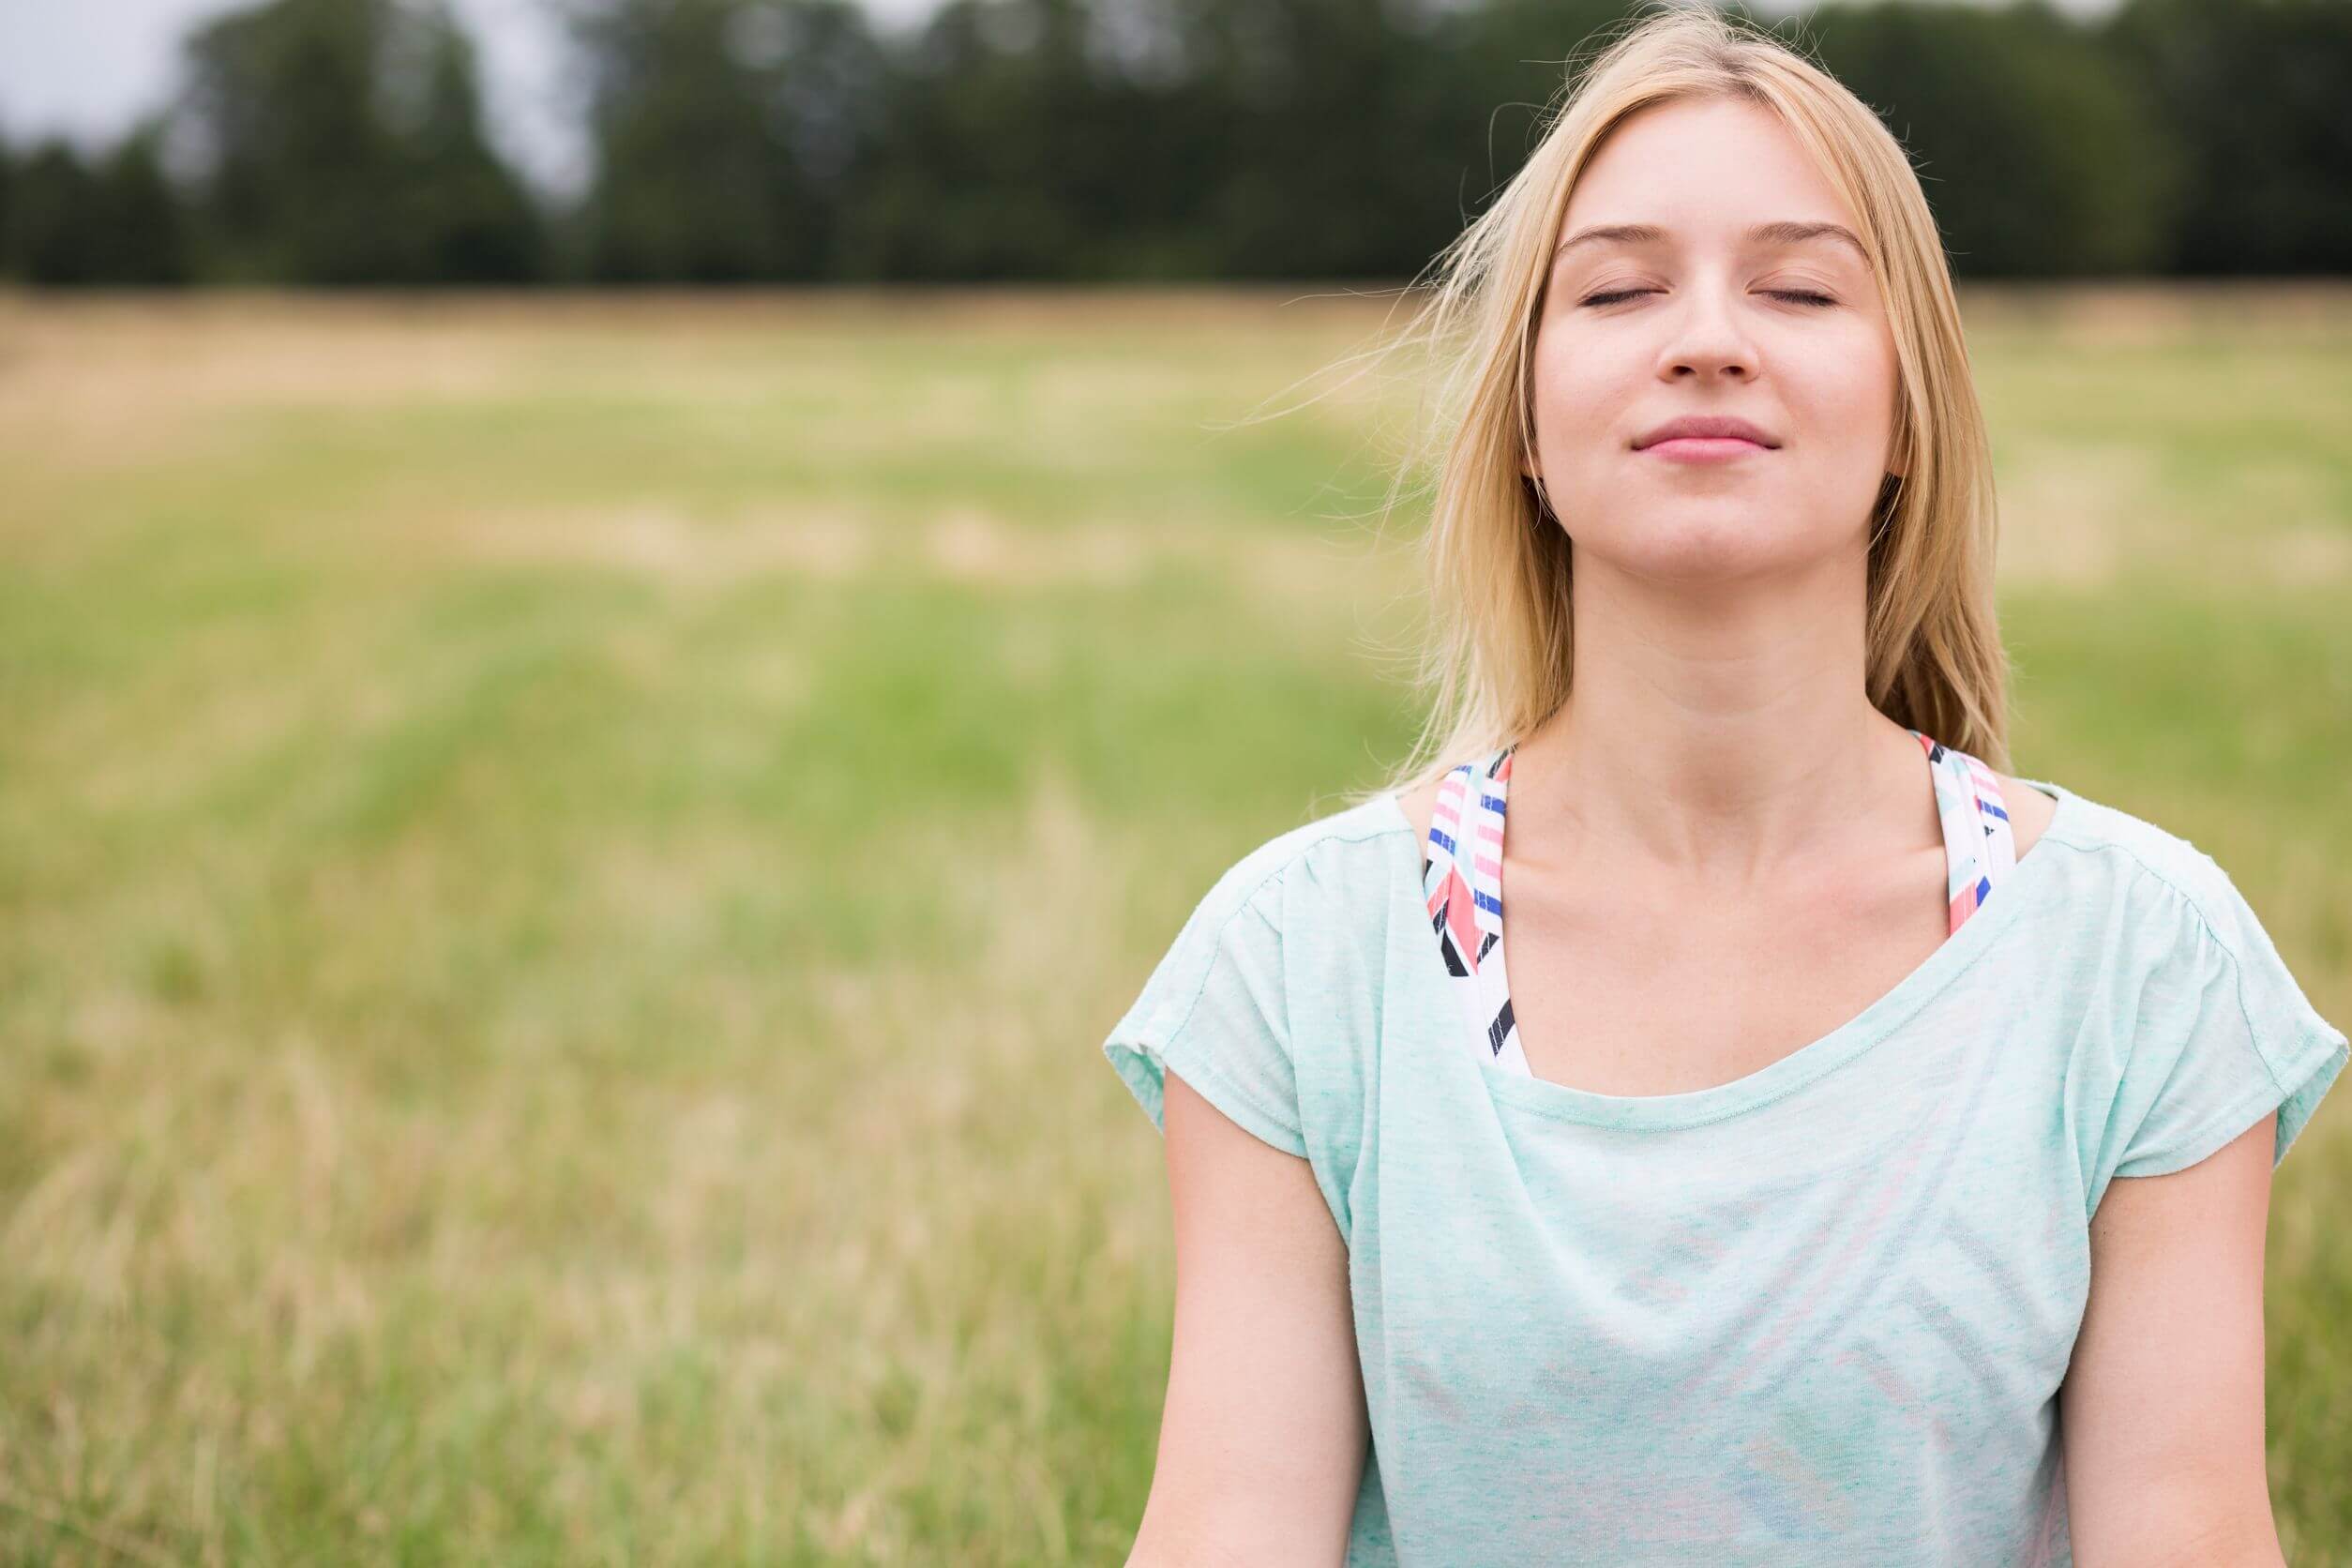 A young woman smiling as she meditates in a field.